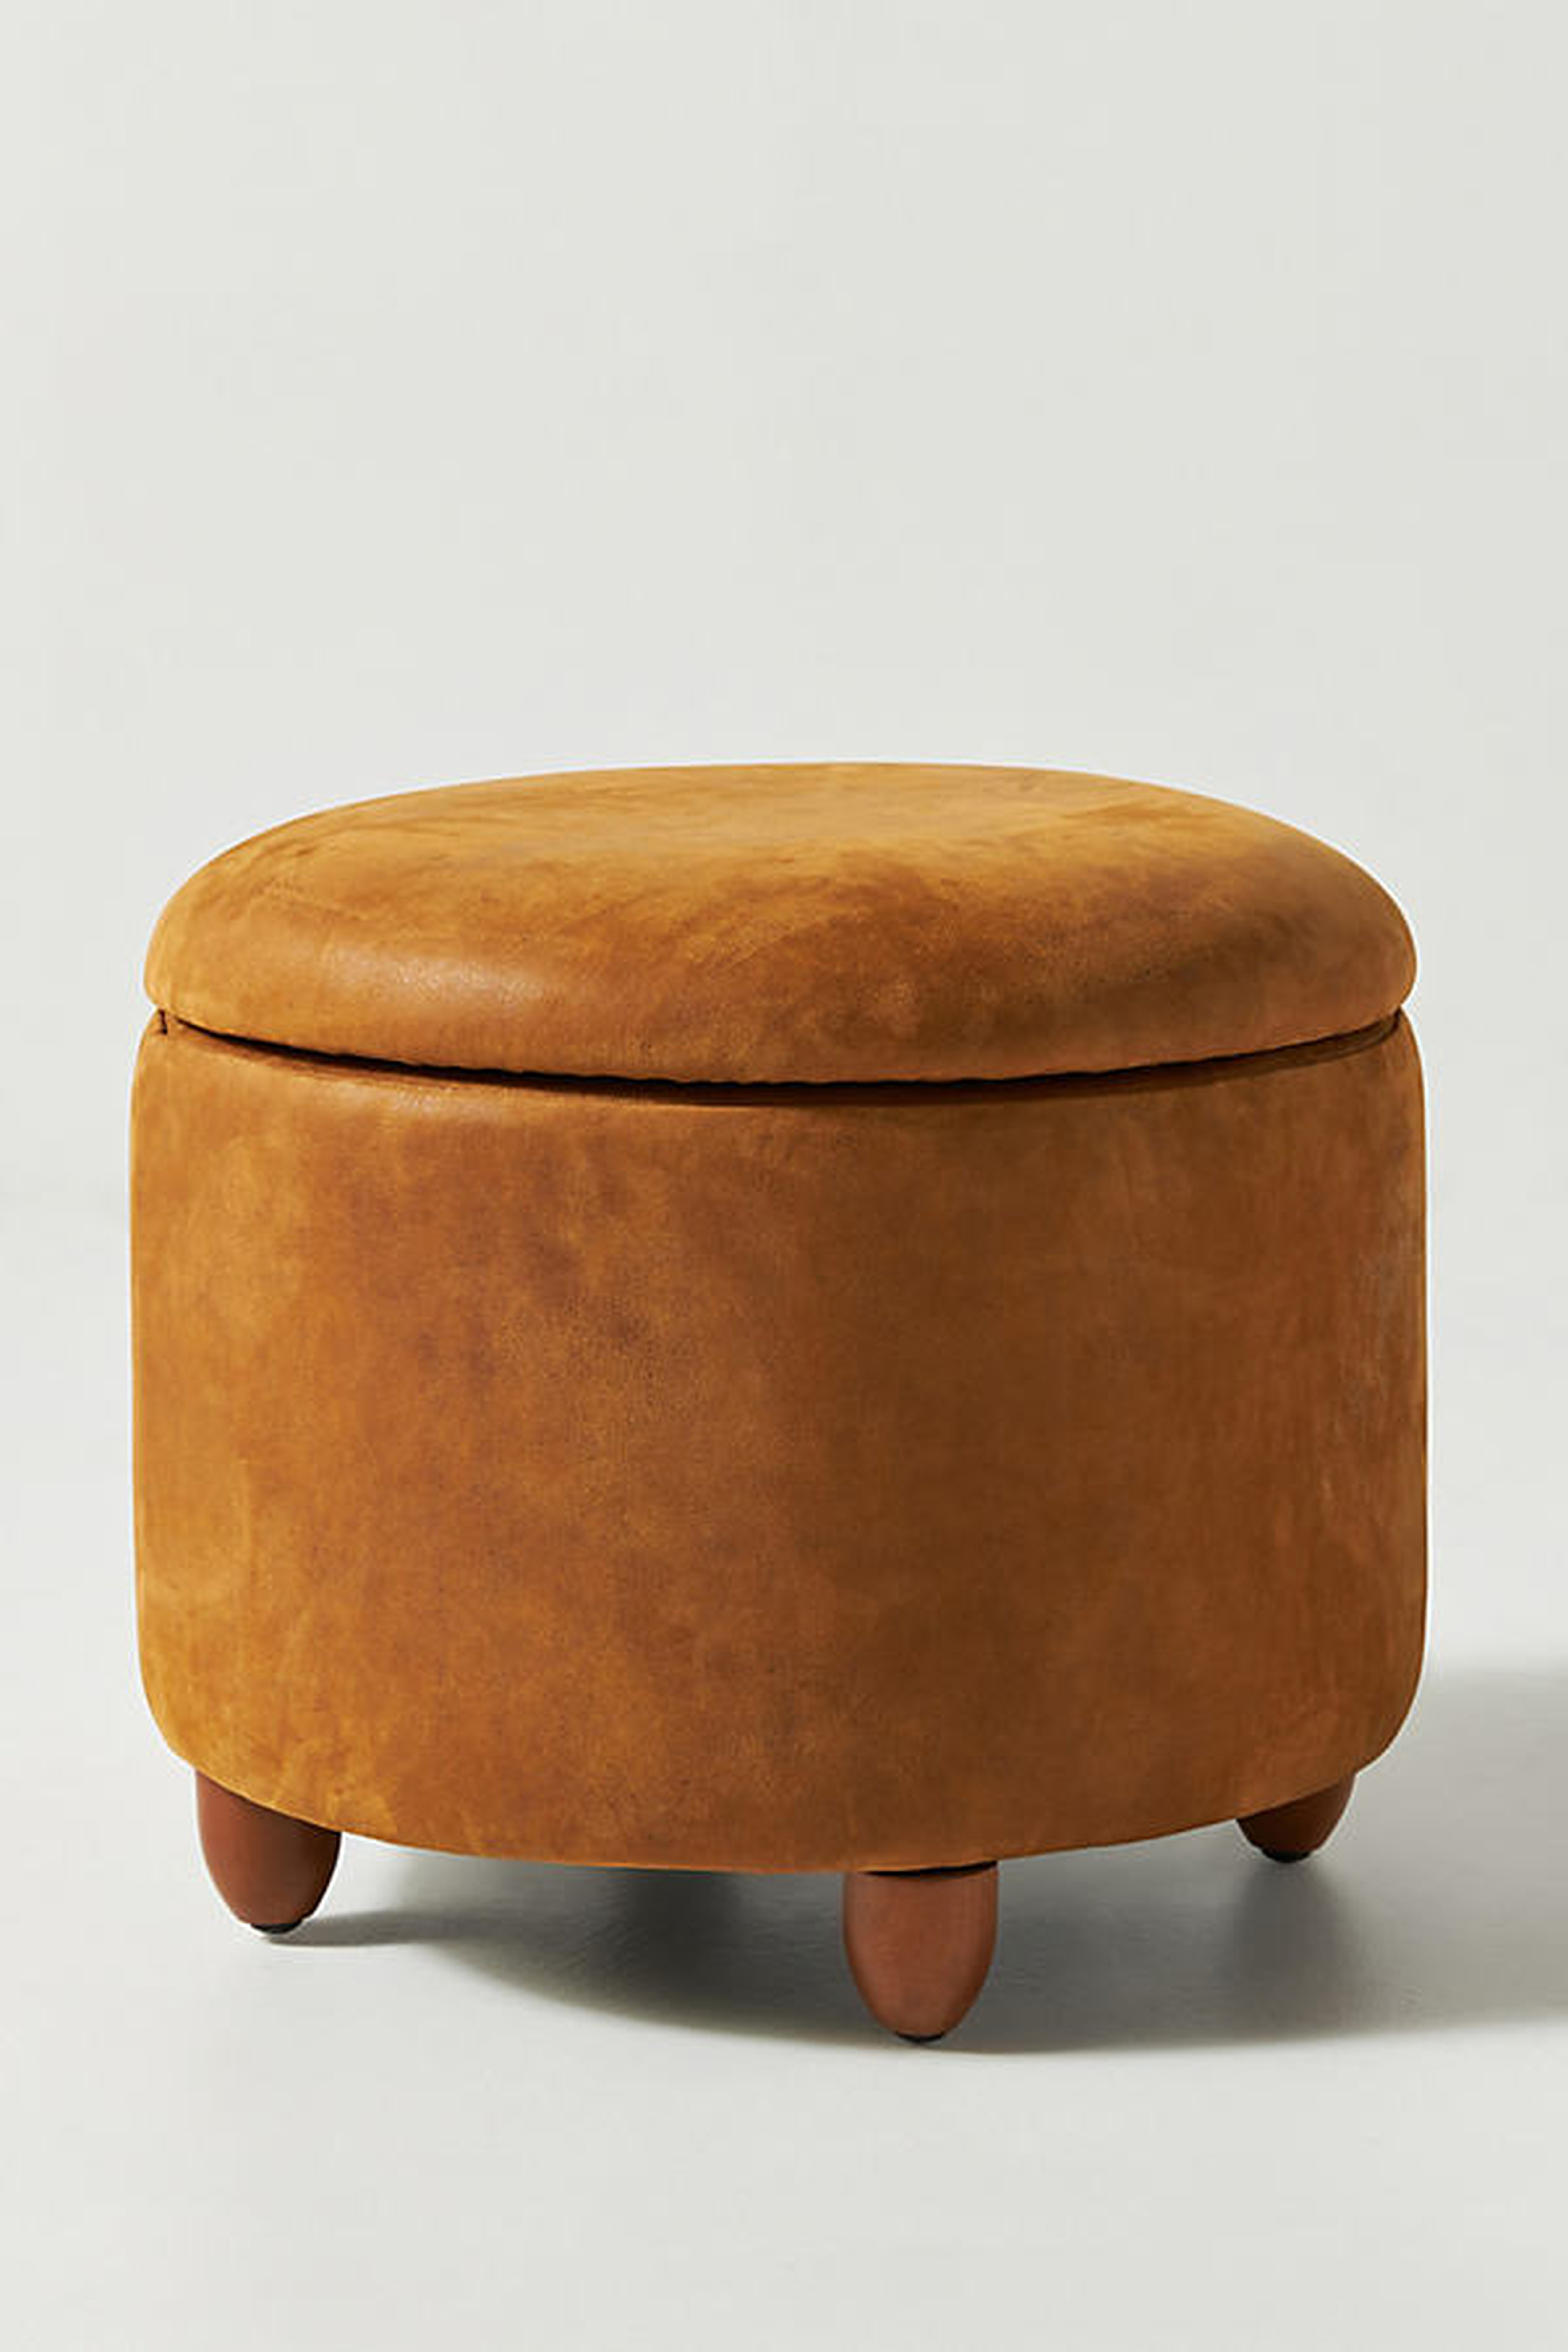 Winchester Leather Louise Storage Ottoman By Anthropologie in Beige - Anthropologie